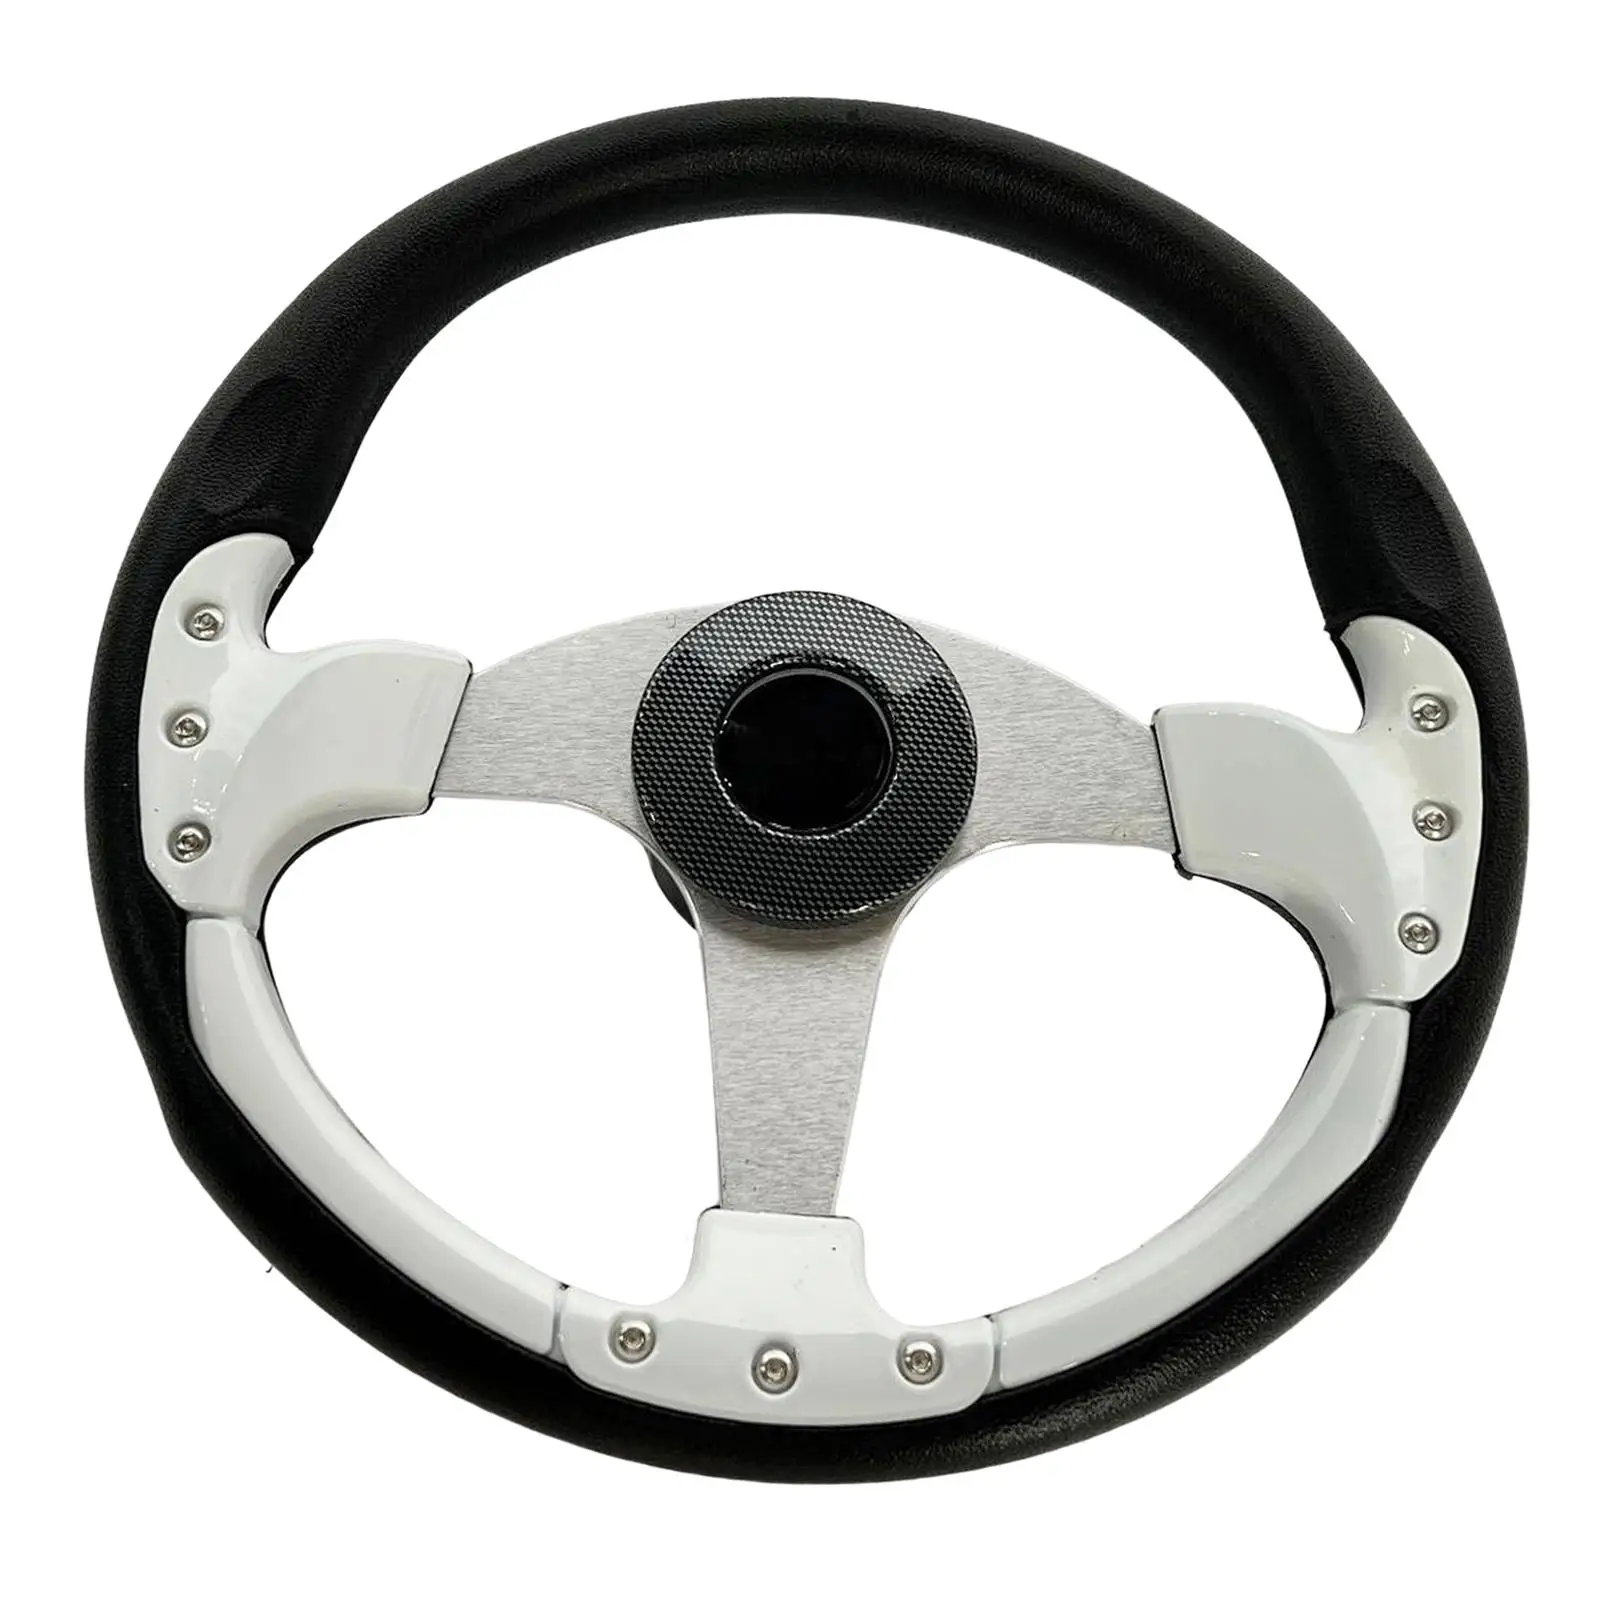 13.8 inch Boat Steering Wheel Replacement Nonslip for Pontoon Boats Vessels